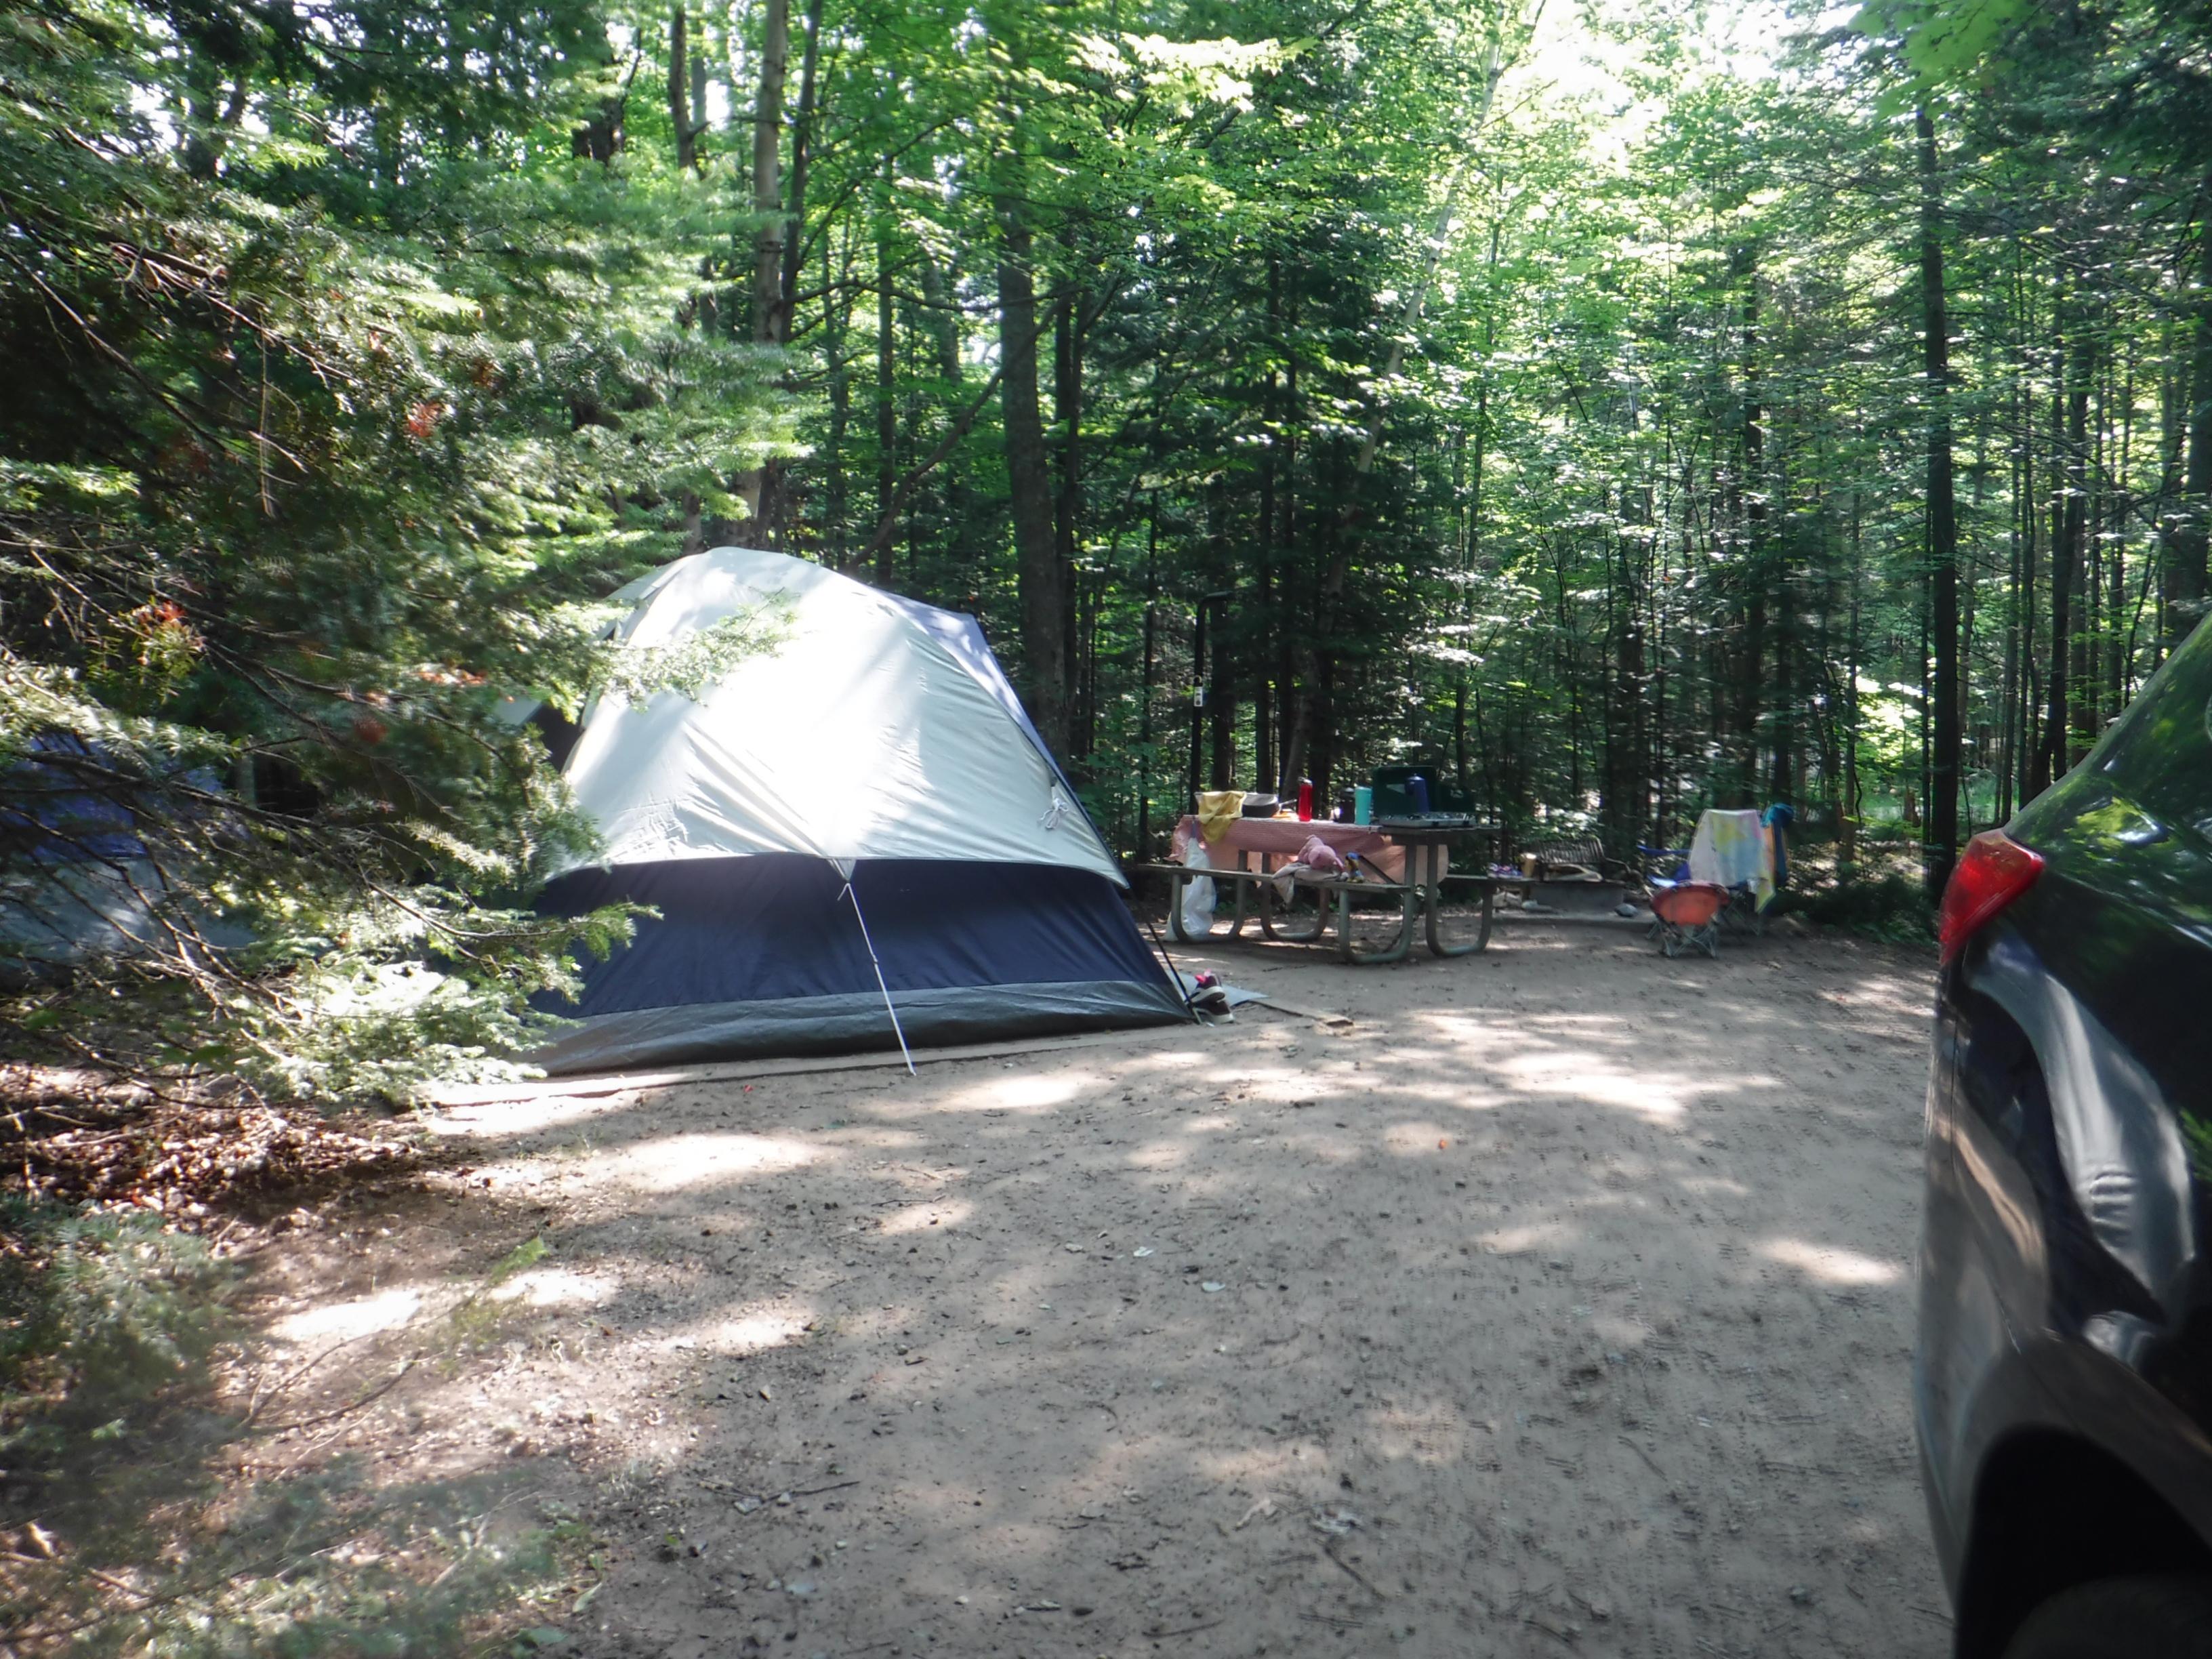 Campsite, including tent and picnic table in forest setting.